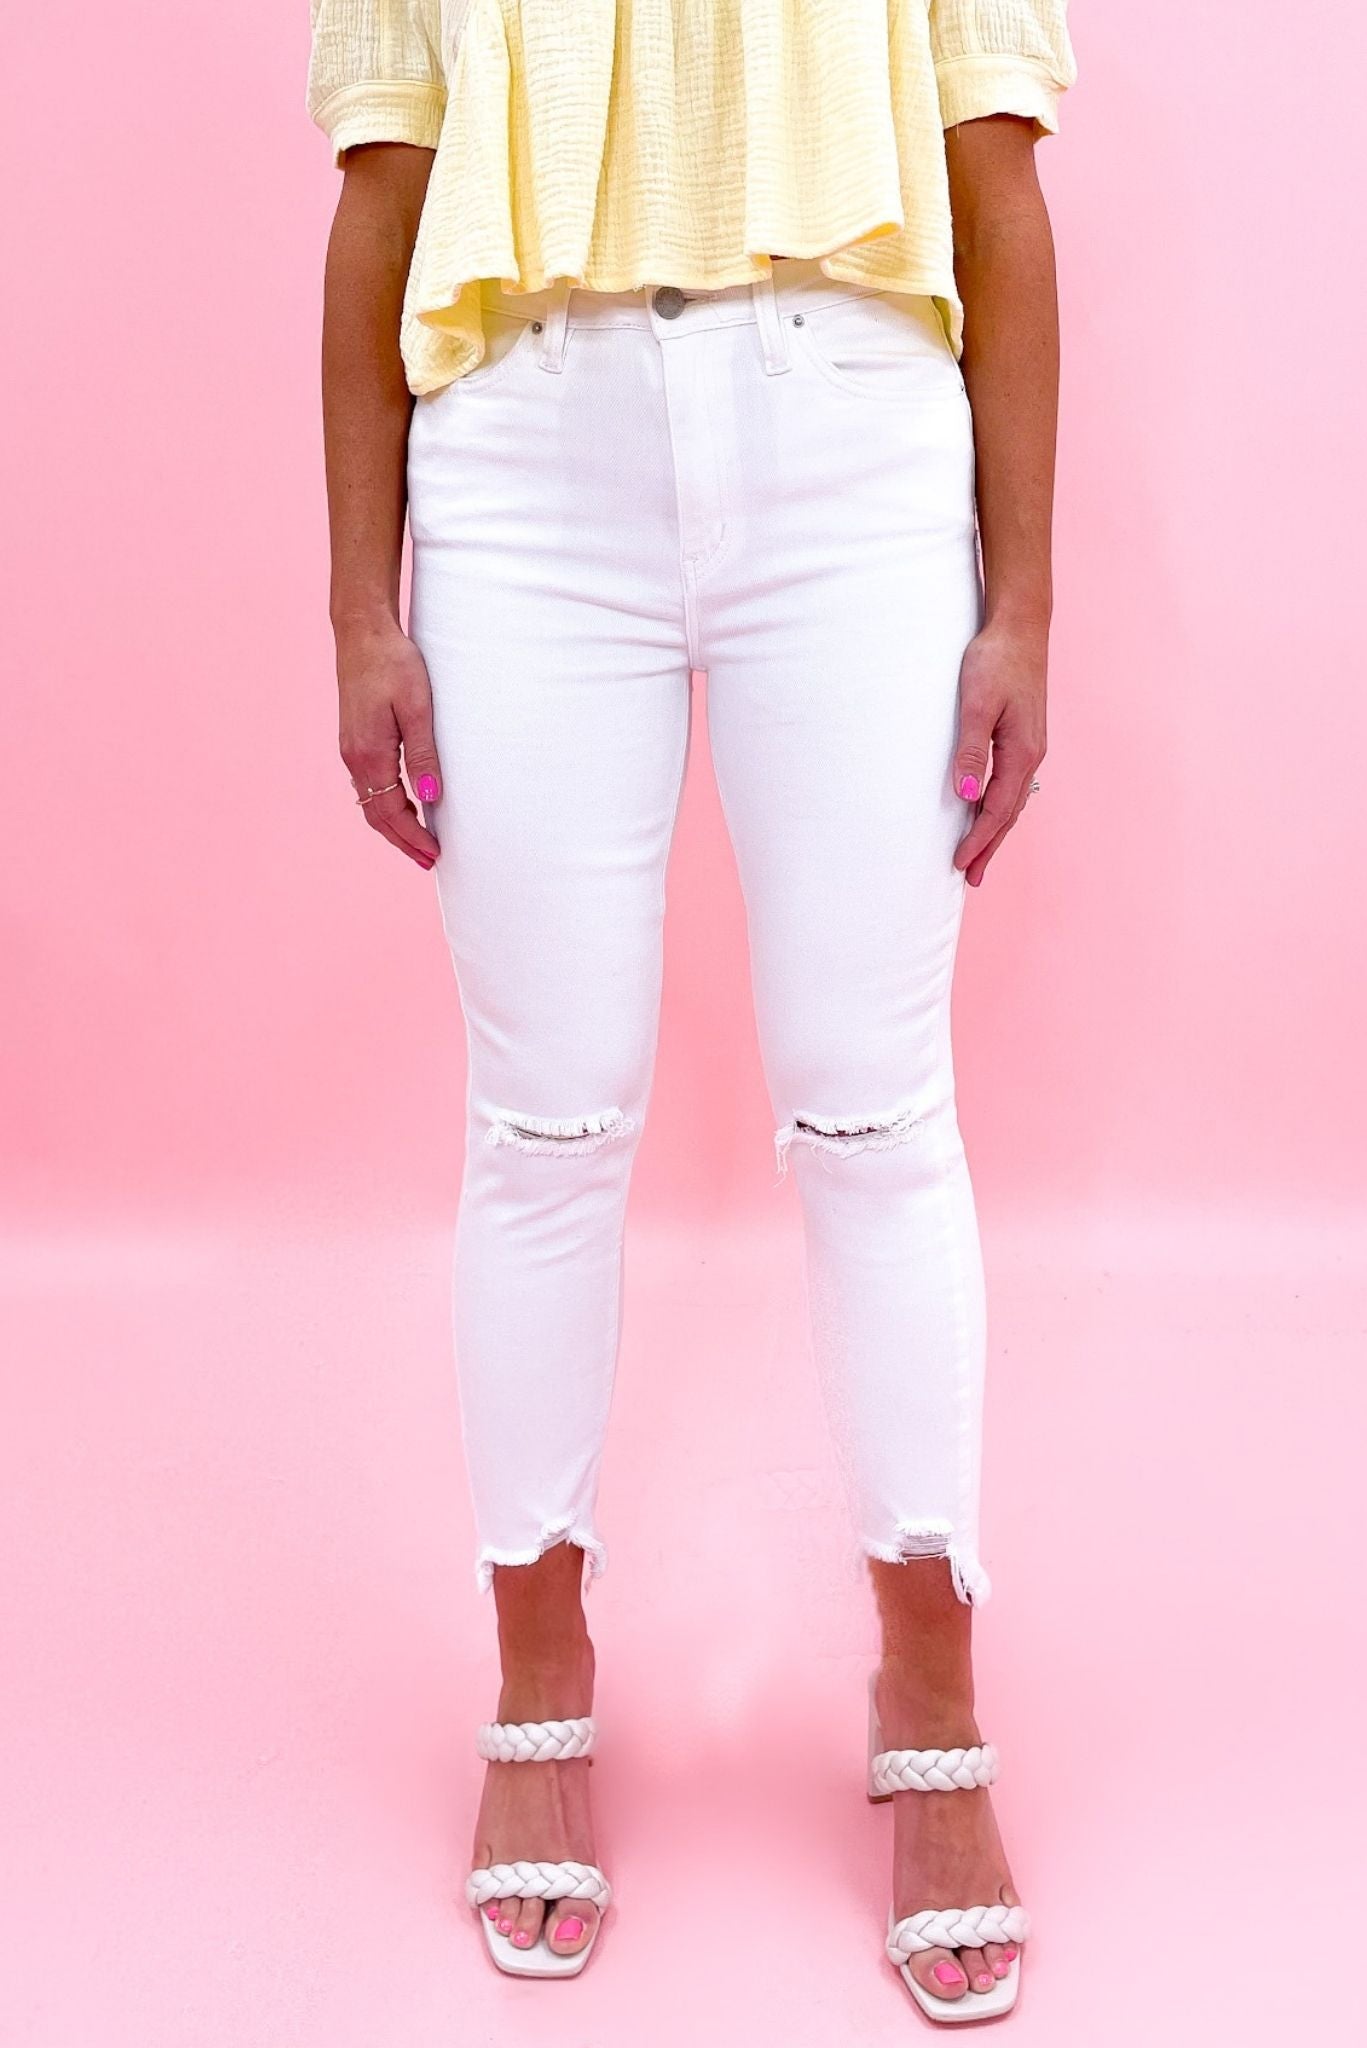 Load image into Gallery viewer, white distressed skinny jeans, yellow peplum muslin top, vacation vibes, summer style, shop style your senses by Mallory Fitzsimmons
